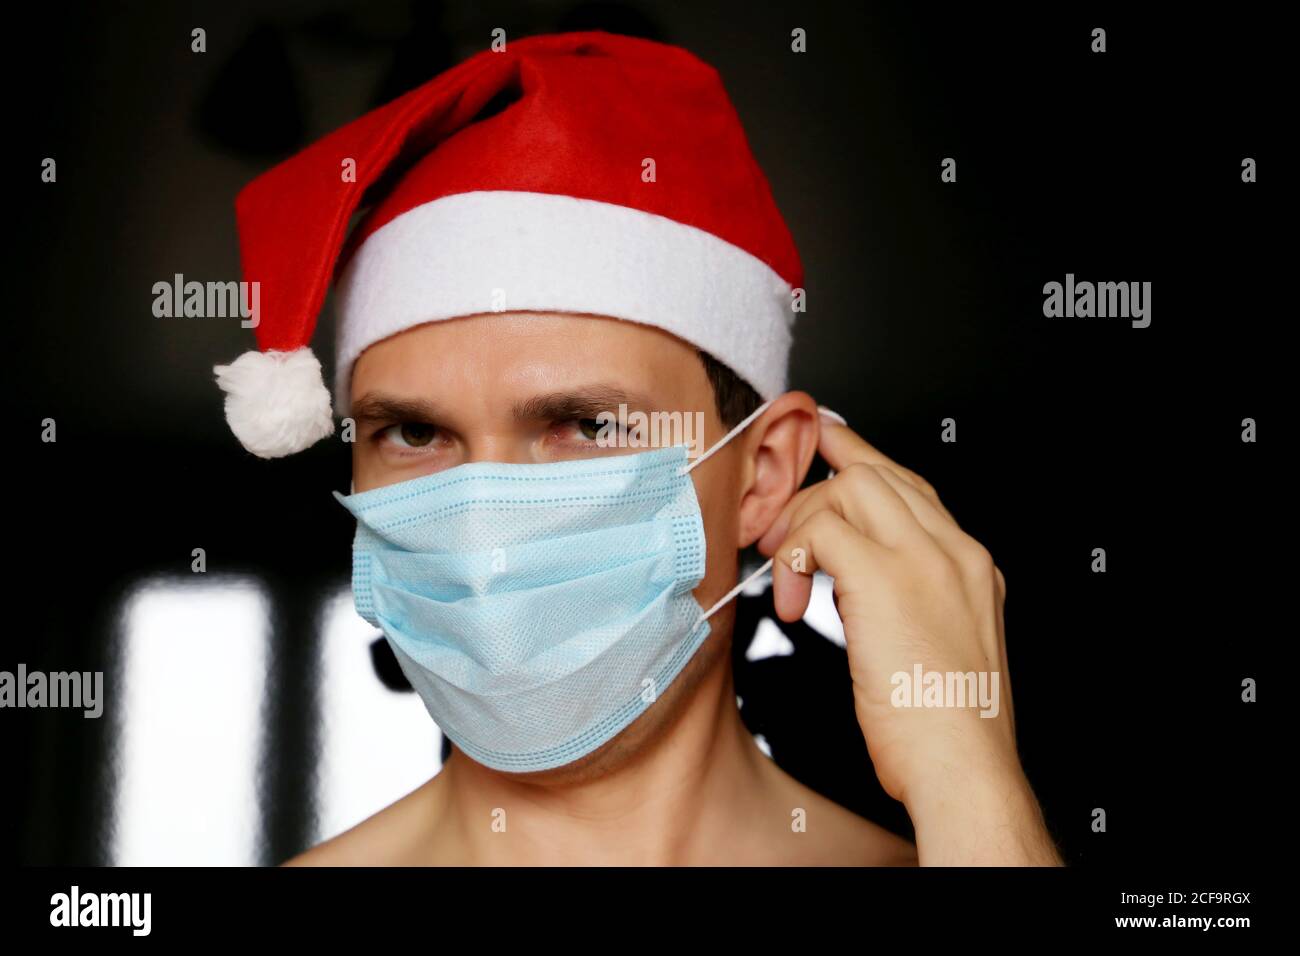 Portrait of man in medical face mask and Santa Claus hat. Christmas celebration during coronavirus pandemic Stock Photo